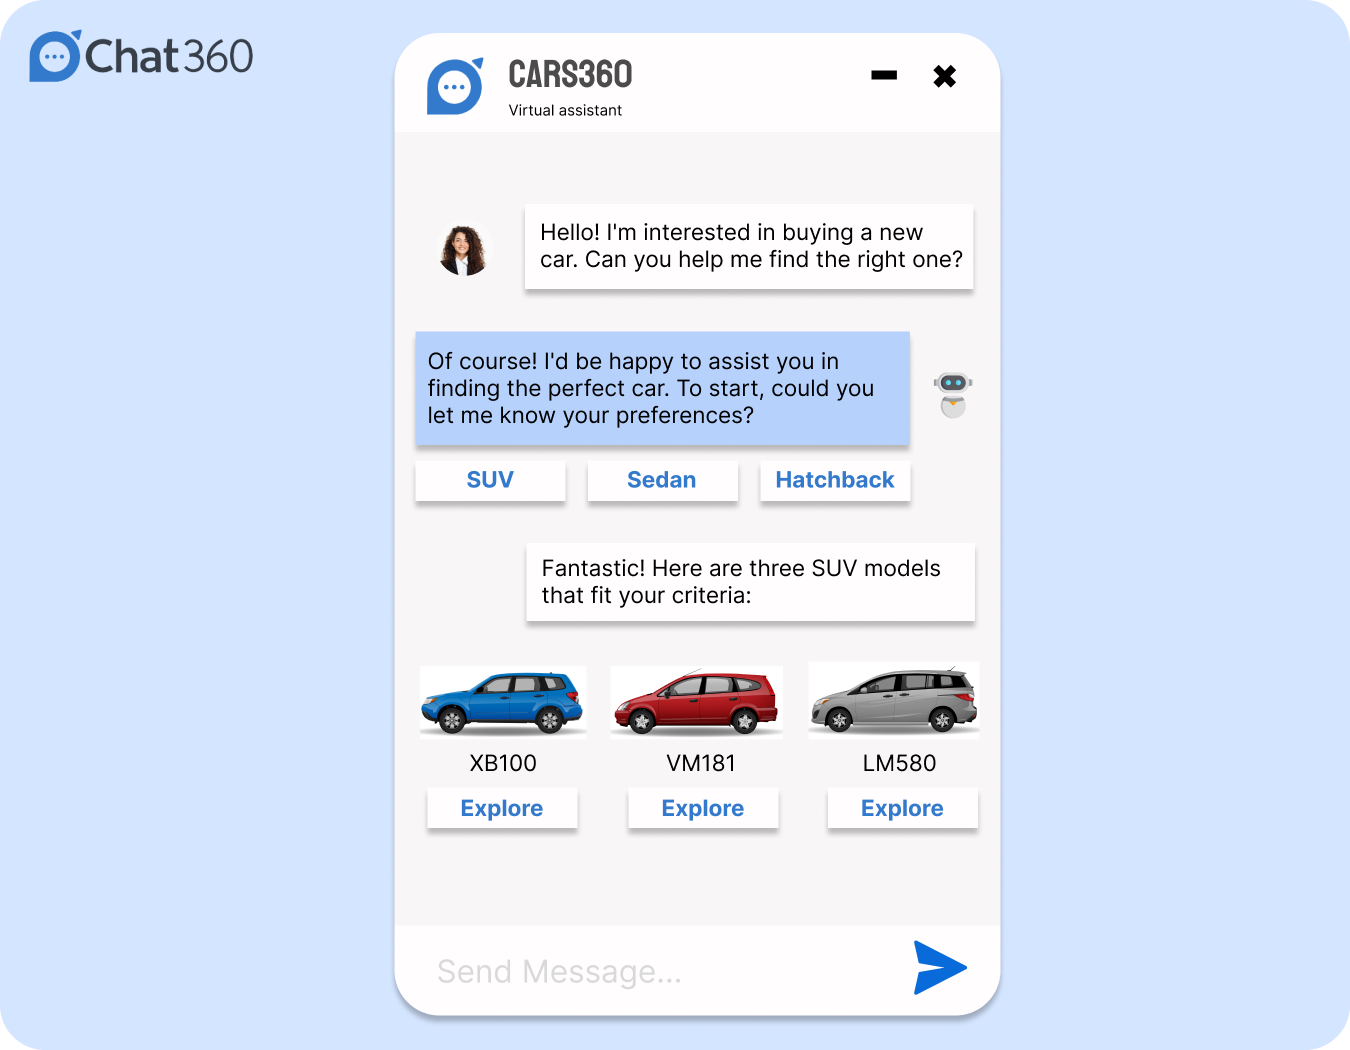 Chatbot in conversation with a user assisting for purchasing a new car